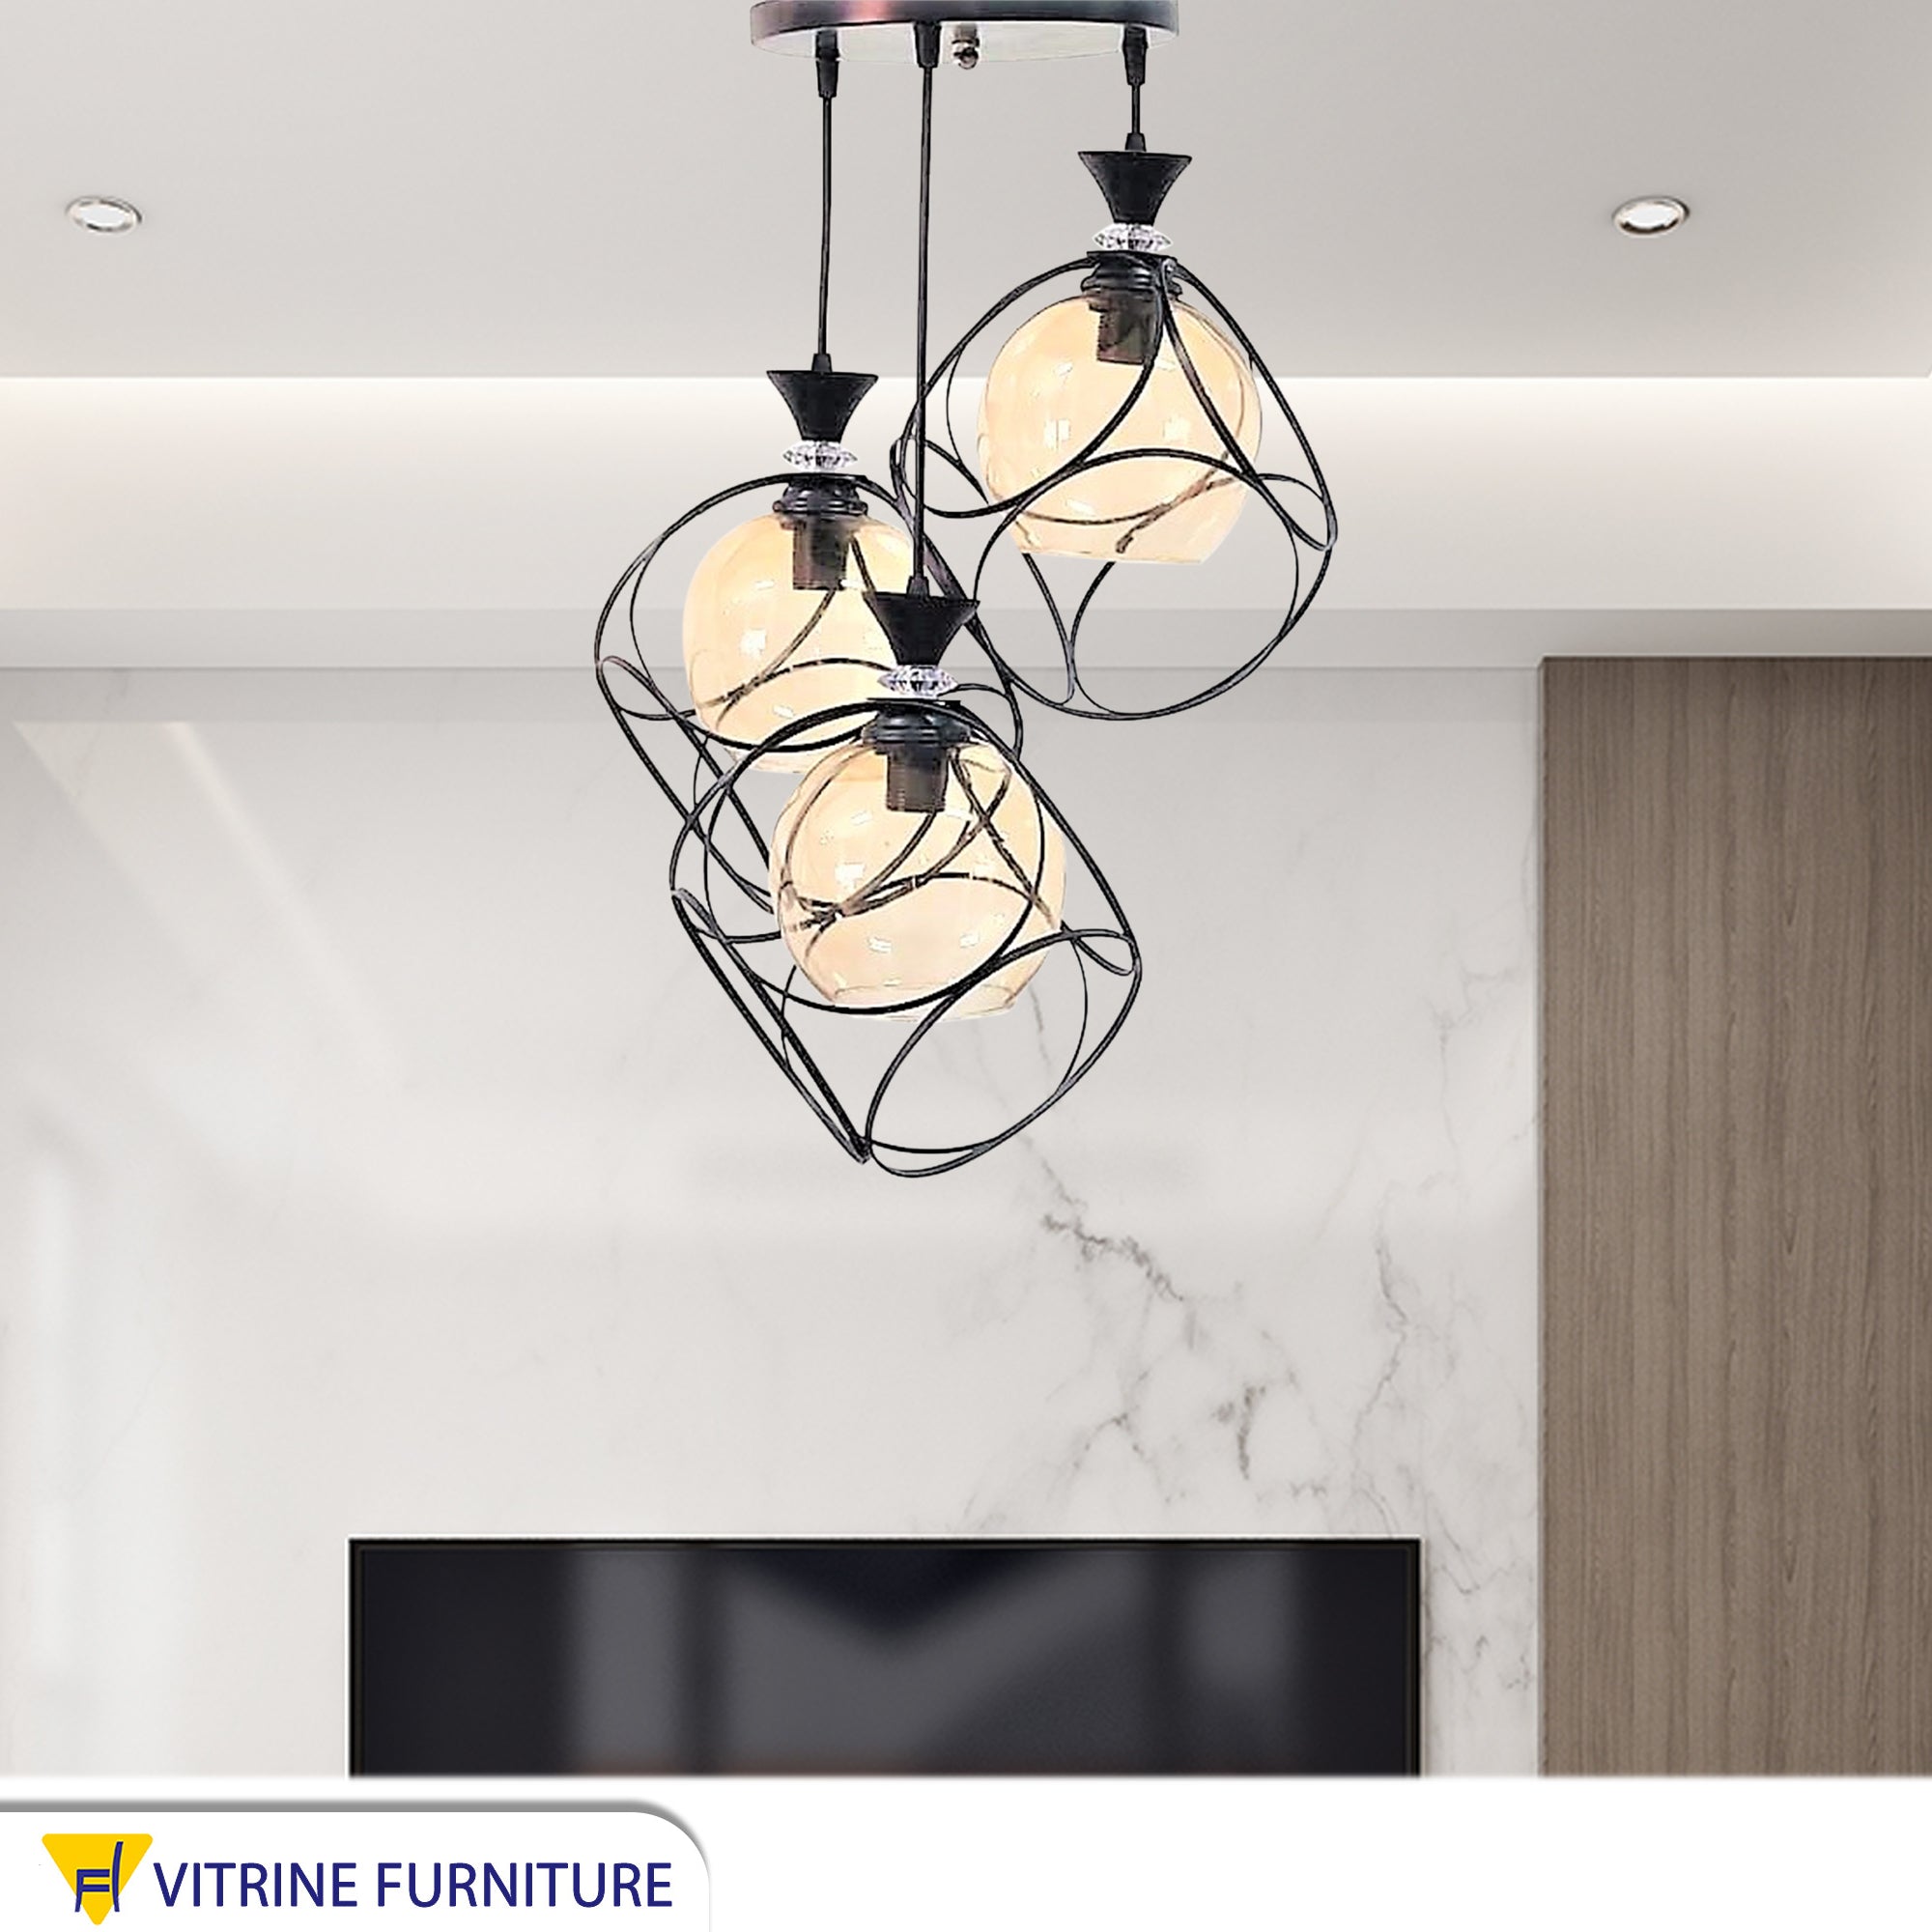 Three Pendant ceiling lamps, black metal and glass